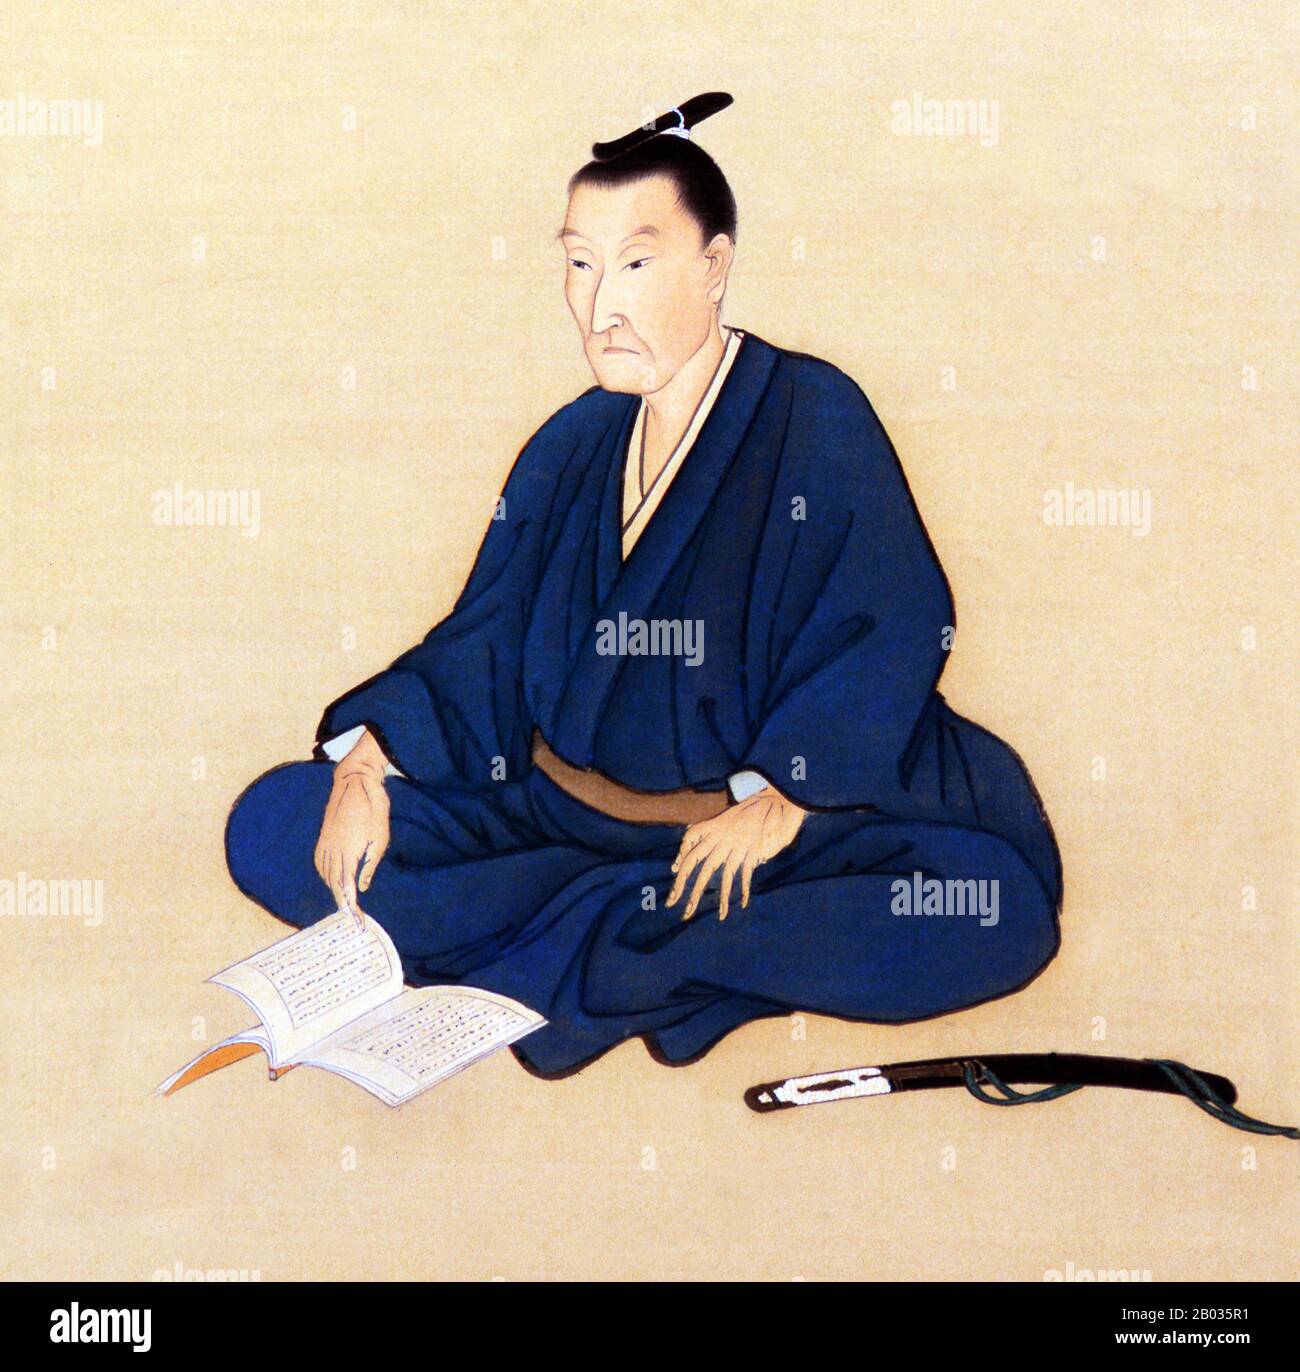 Yoshida Shoin (September 20, 1830 – November 21, 1859), commonly named Torajiro, was one of Japan's most distinguished intellectuals in the closing days of the Tokugawa shogunate.   An opponent of the Tokugawa Shogunate and advocate of political reform, he was executed by the Tokugawa authorities in 1859, aged 29.   Yoshida Shoin is  enshrined at the Shoin shrine in Wakabayashi, Setagaya-ku, in Tokyo, as well as at his birthplace in Hagi, Yamaguchi Prefecture. Stock Photo